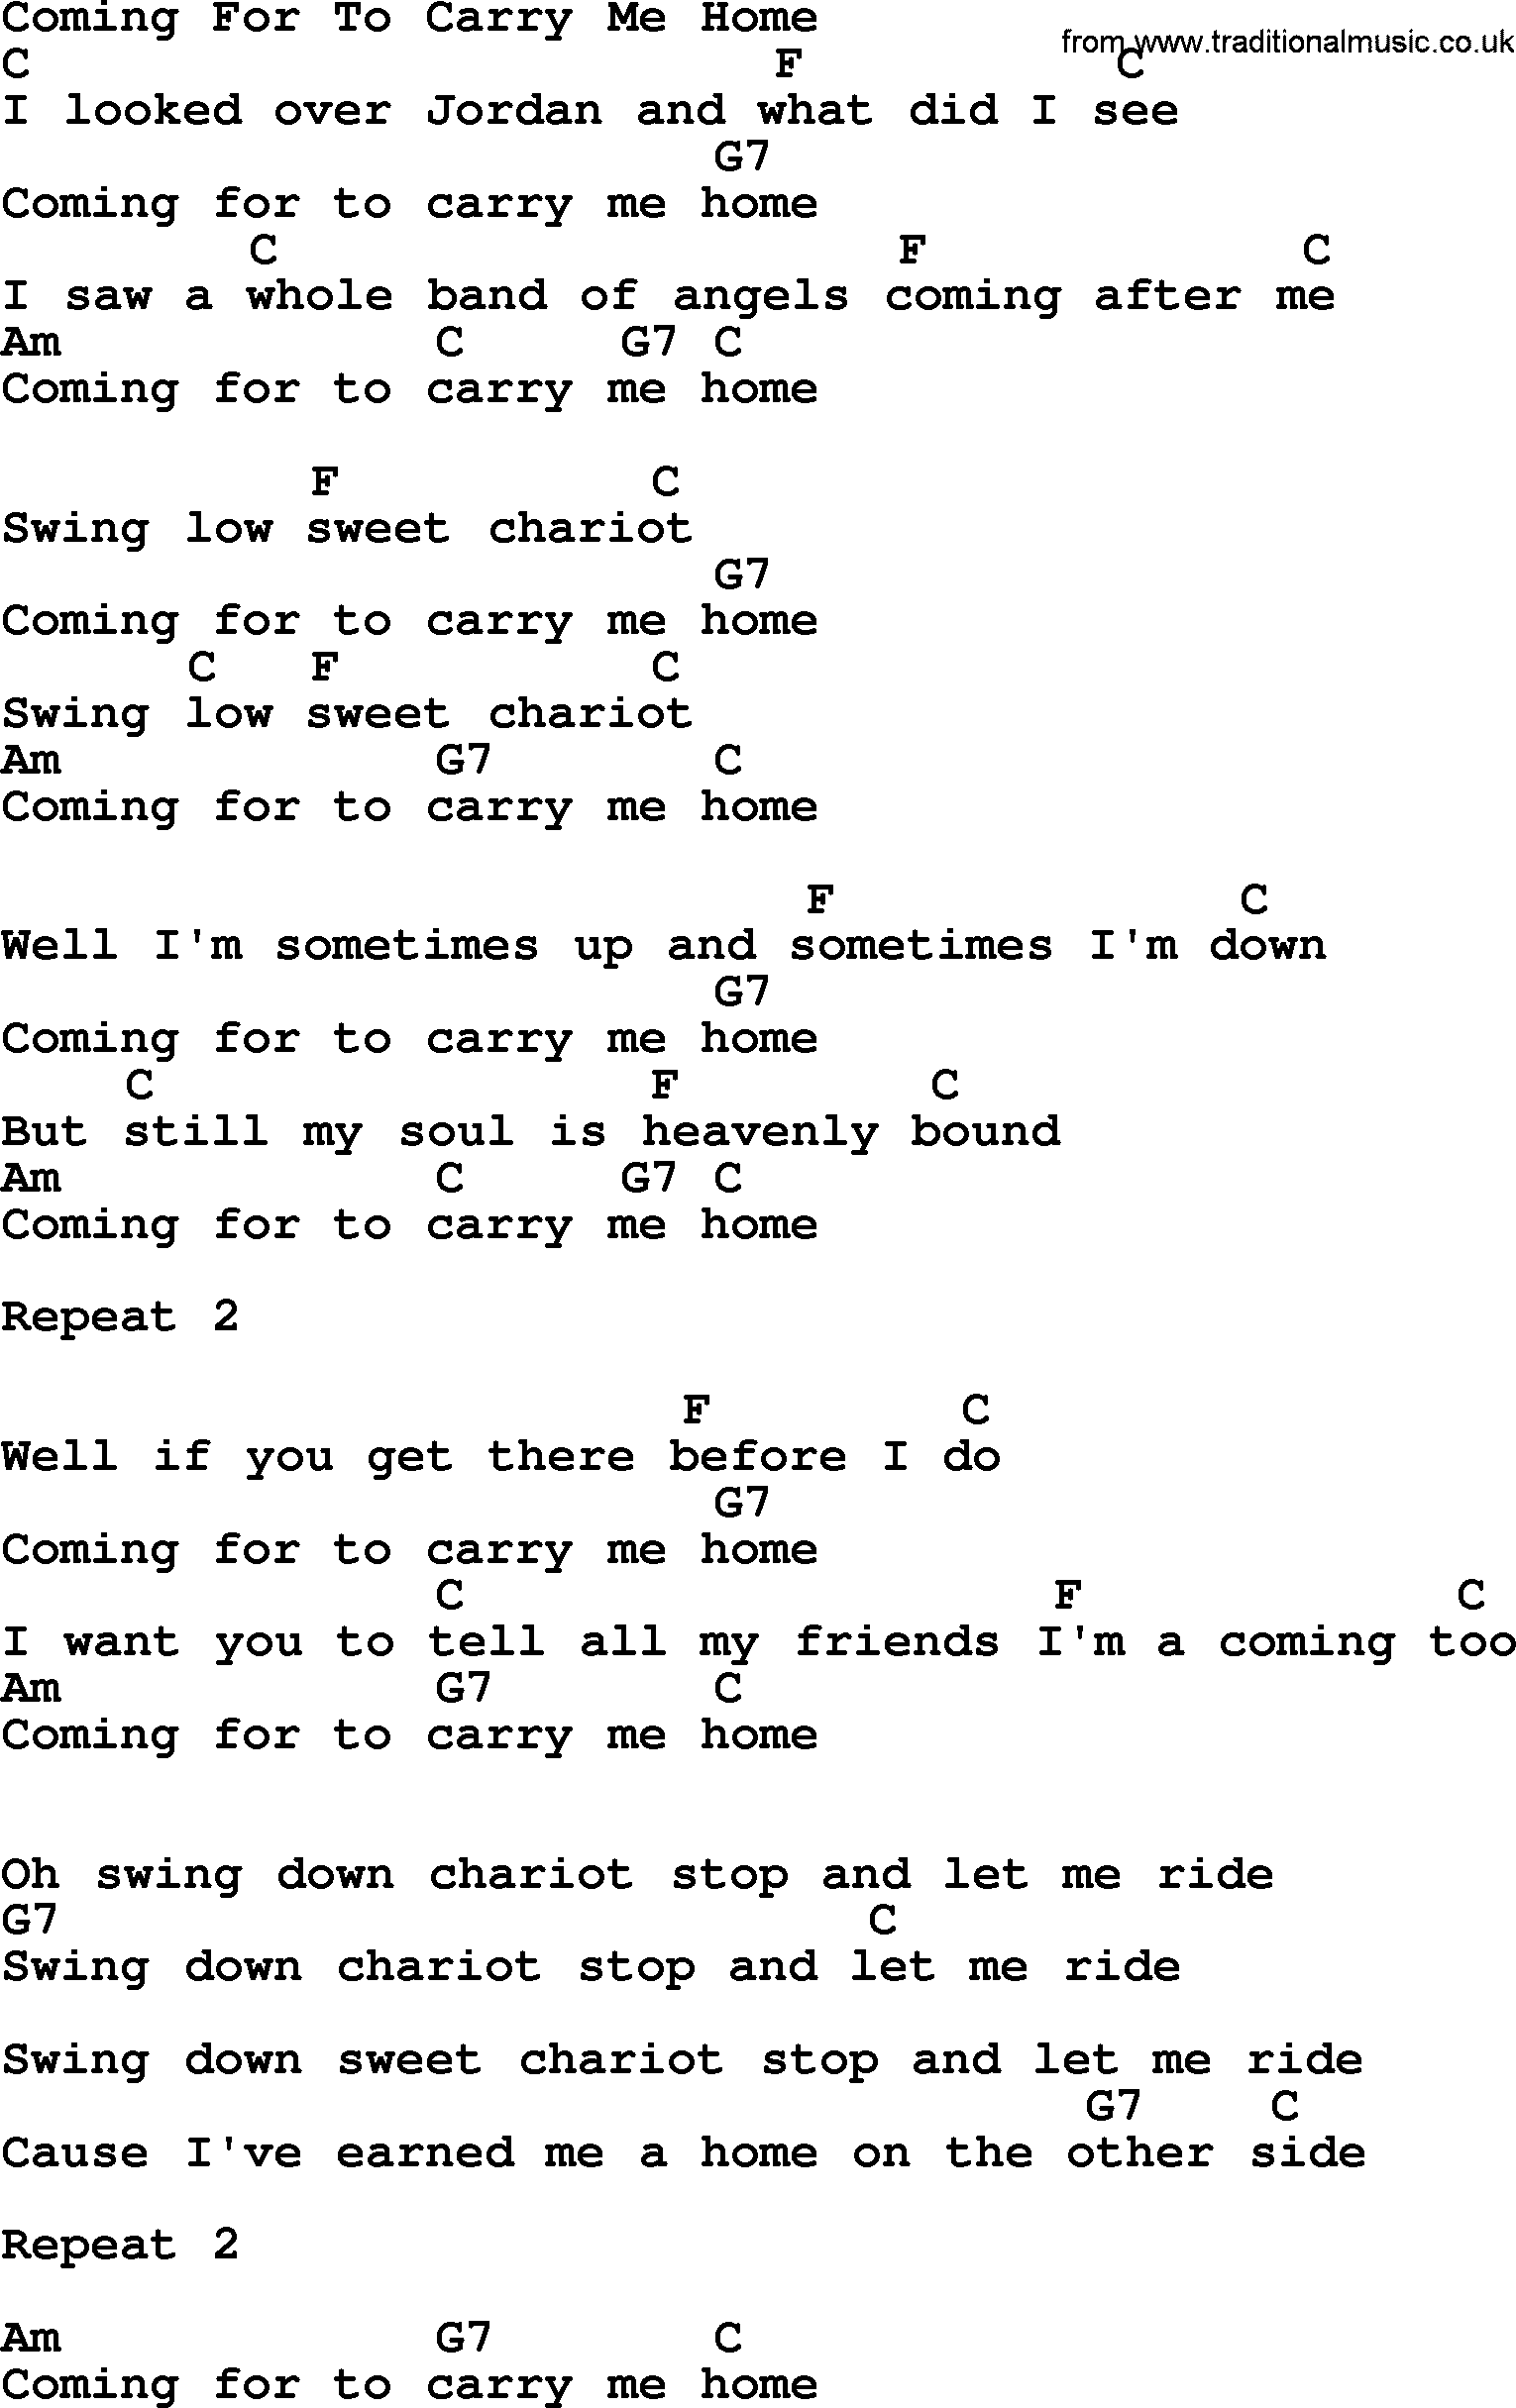 Bluegrass song: Coming For To Carry Me Home, lyrics and chords